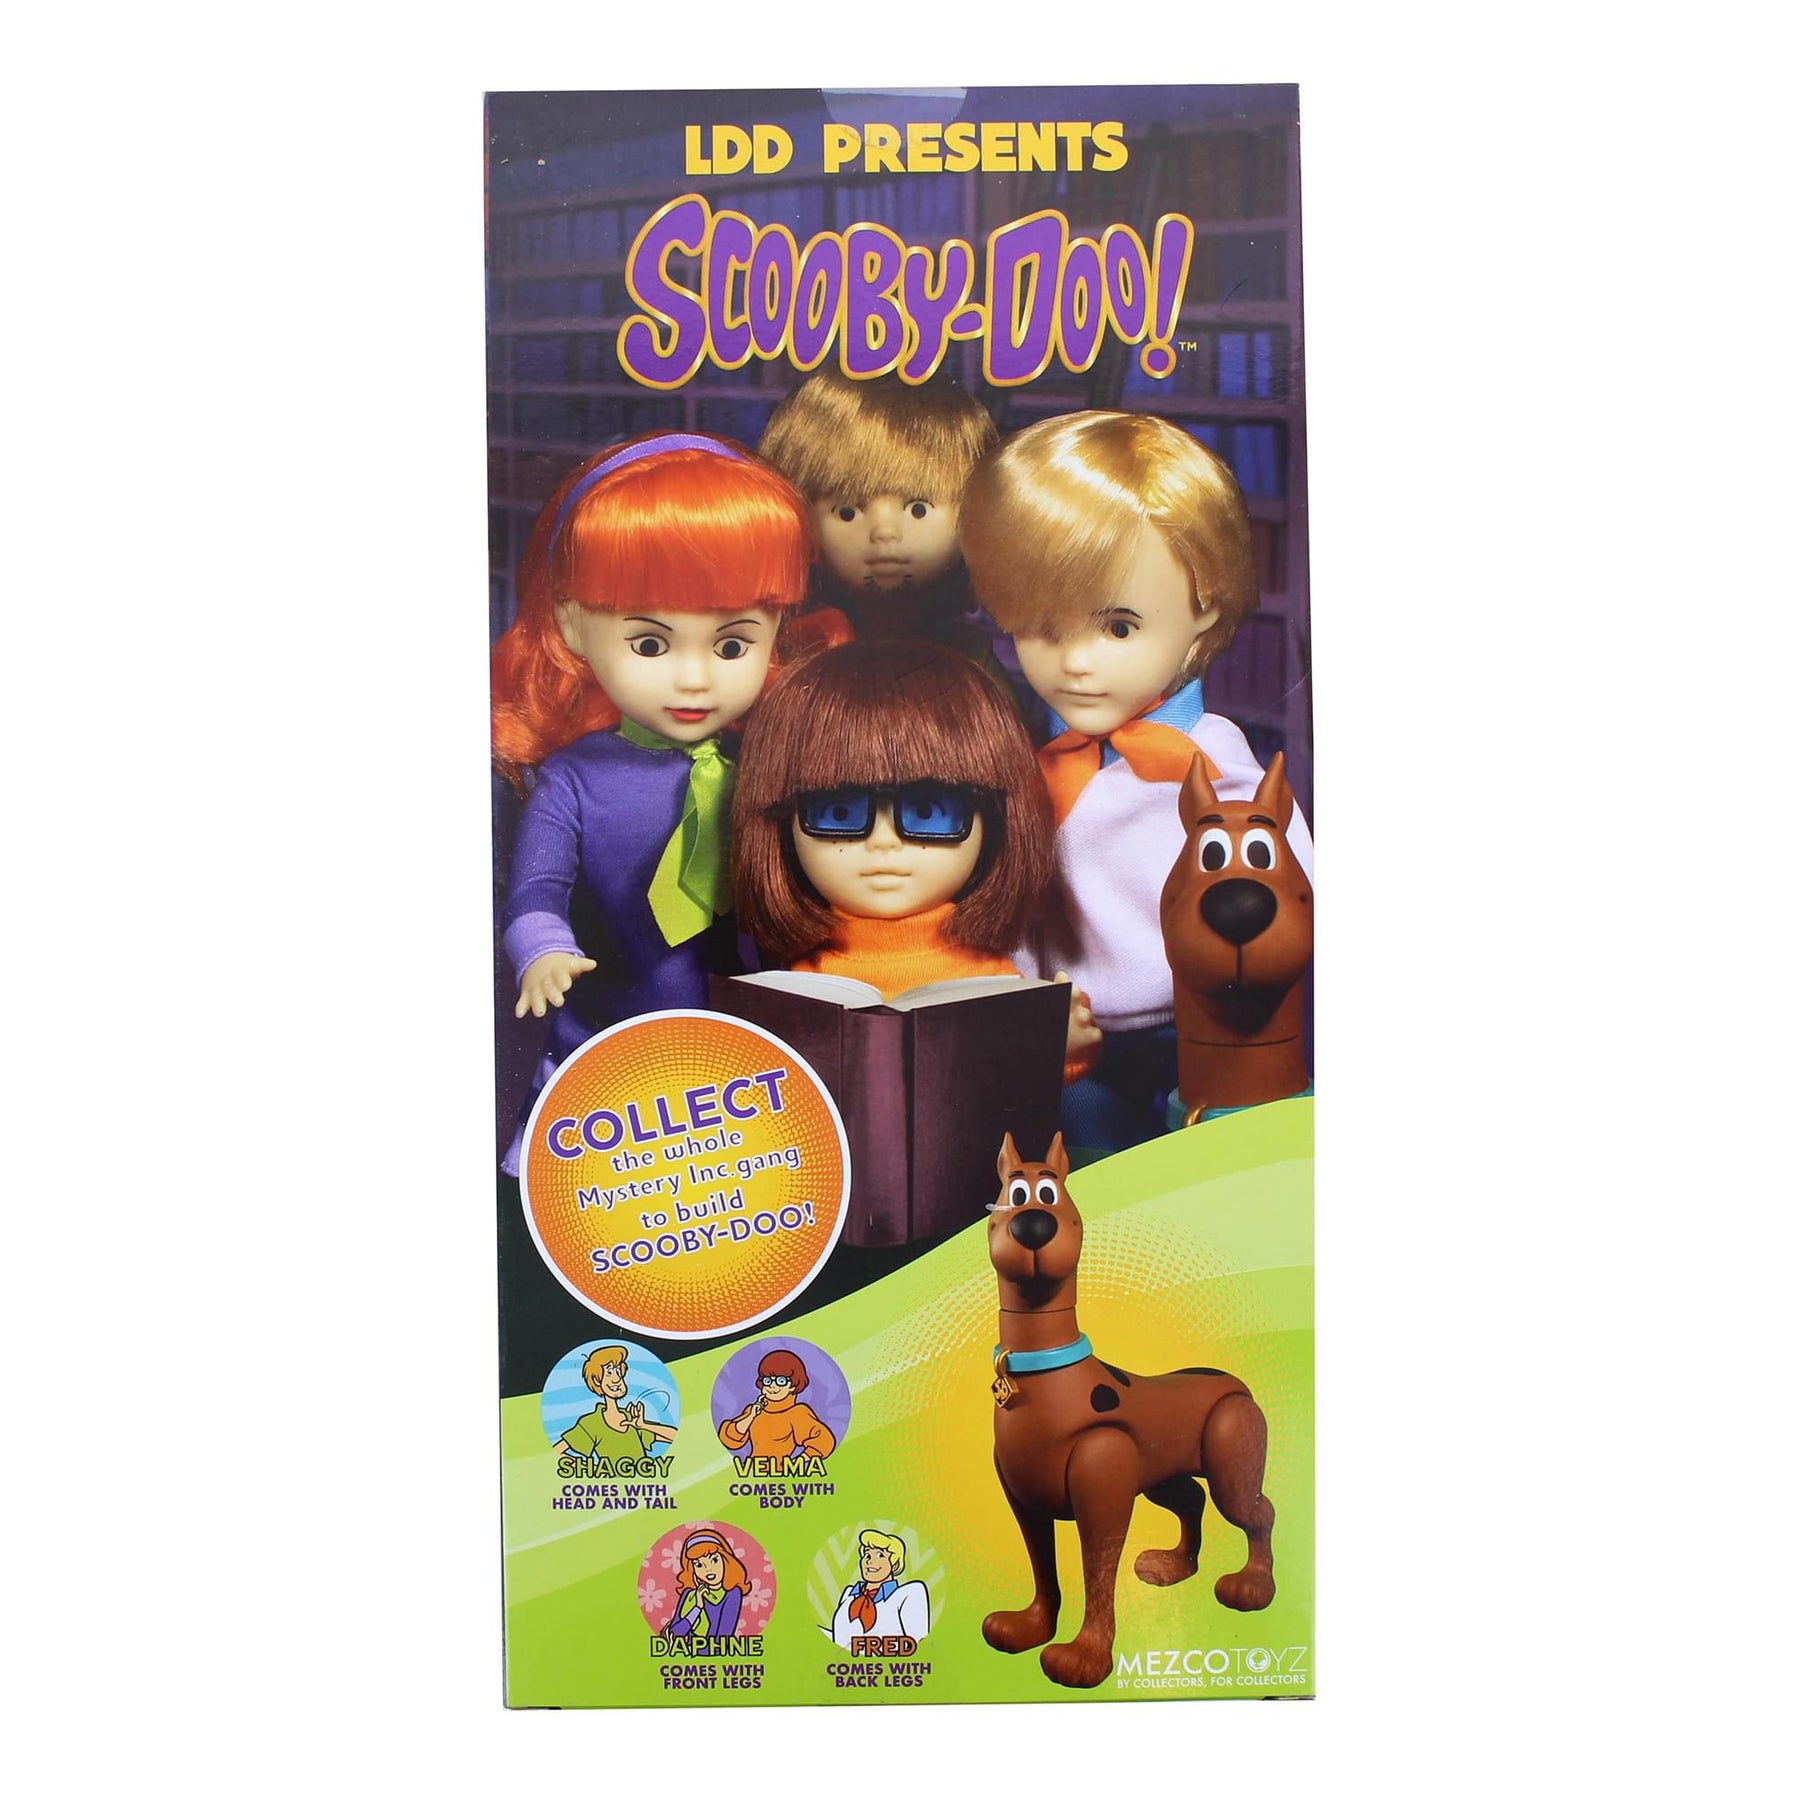 Scooby-Doo & Mystery Inc 10 Inch Living Dead Doll | Fred